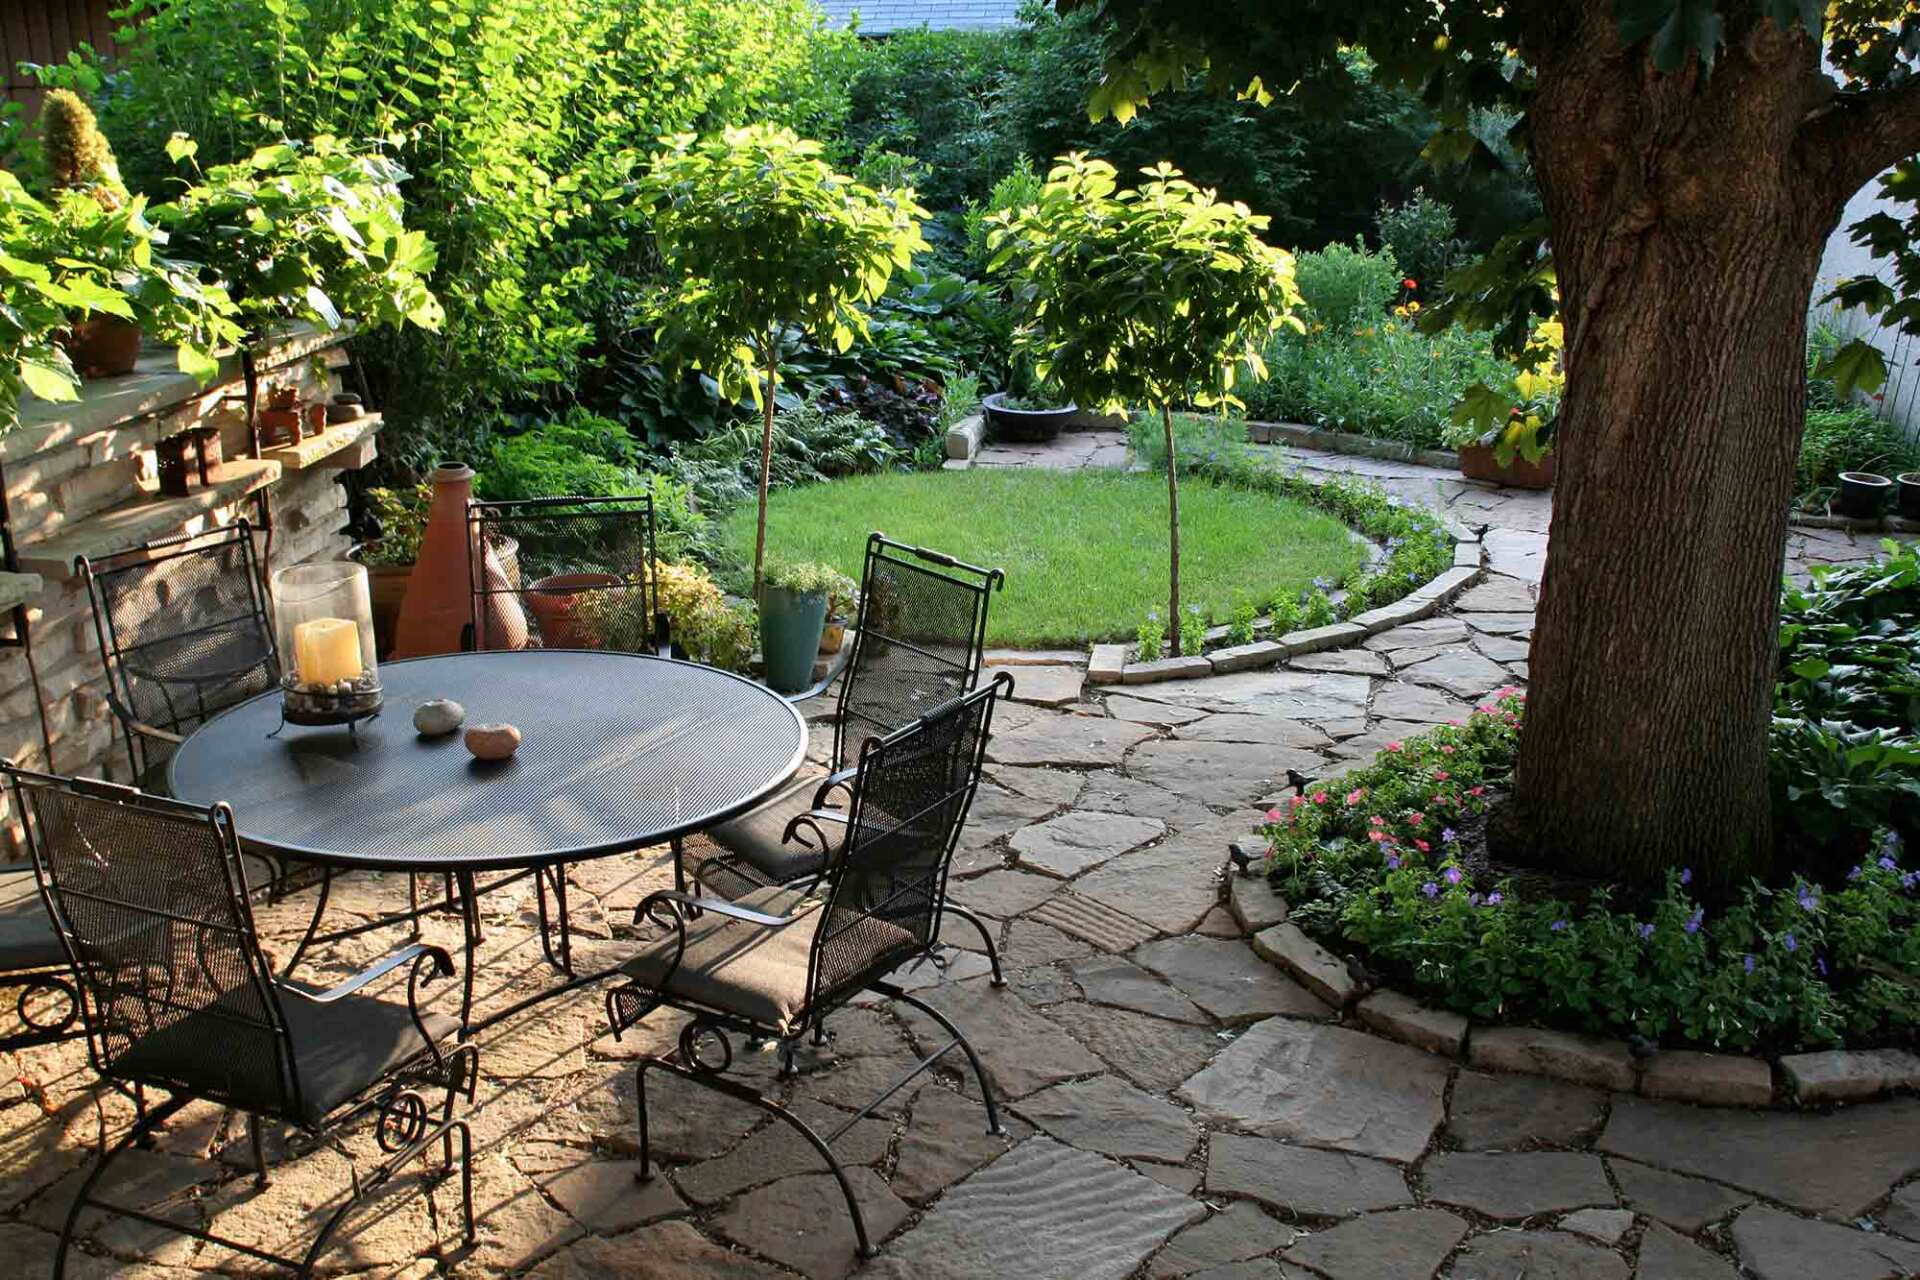 A garden and patio in the warm afternoon sun